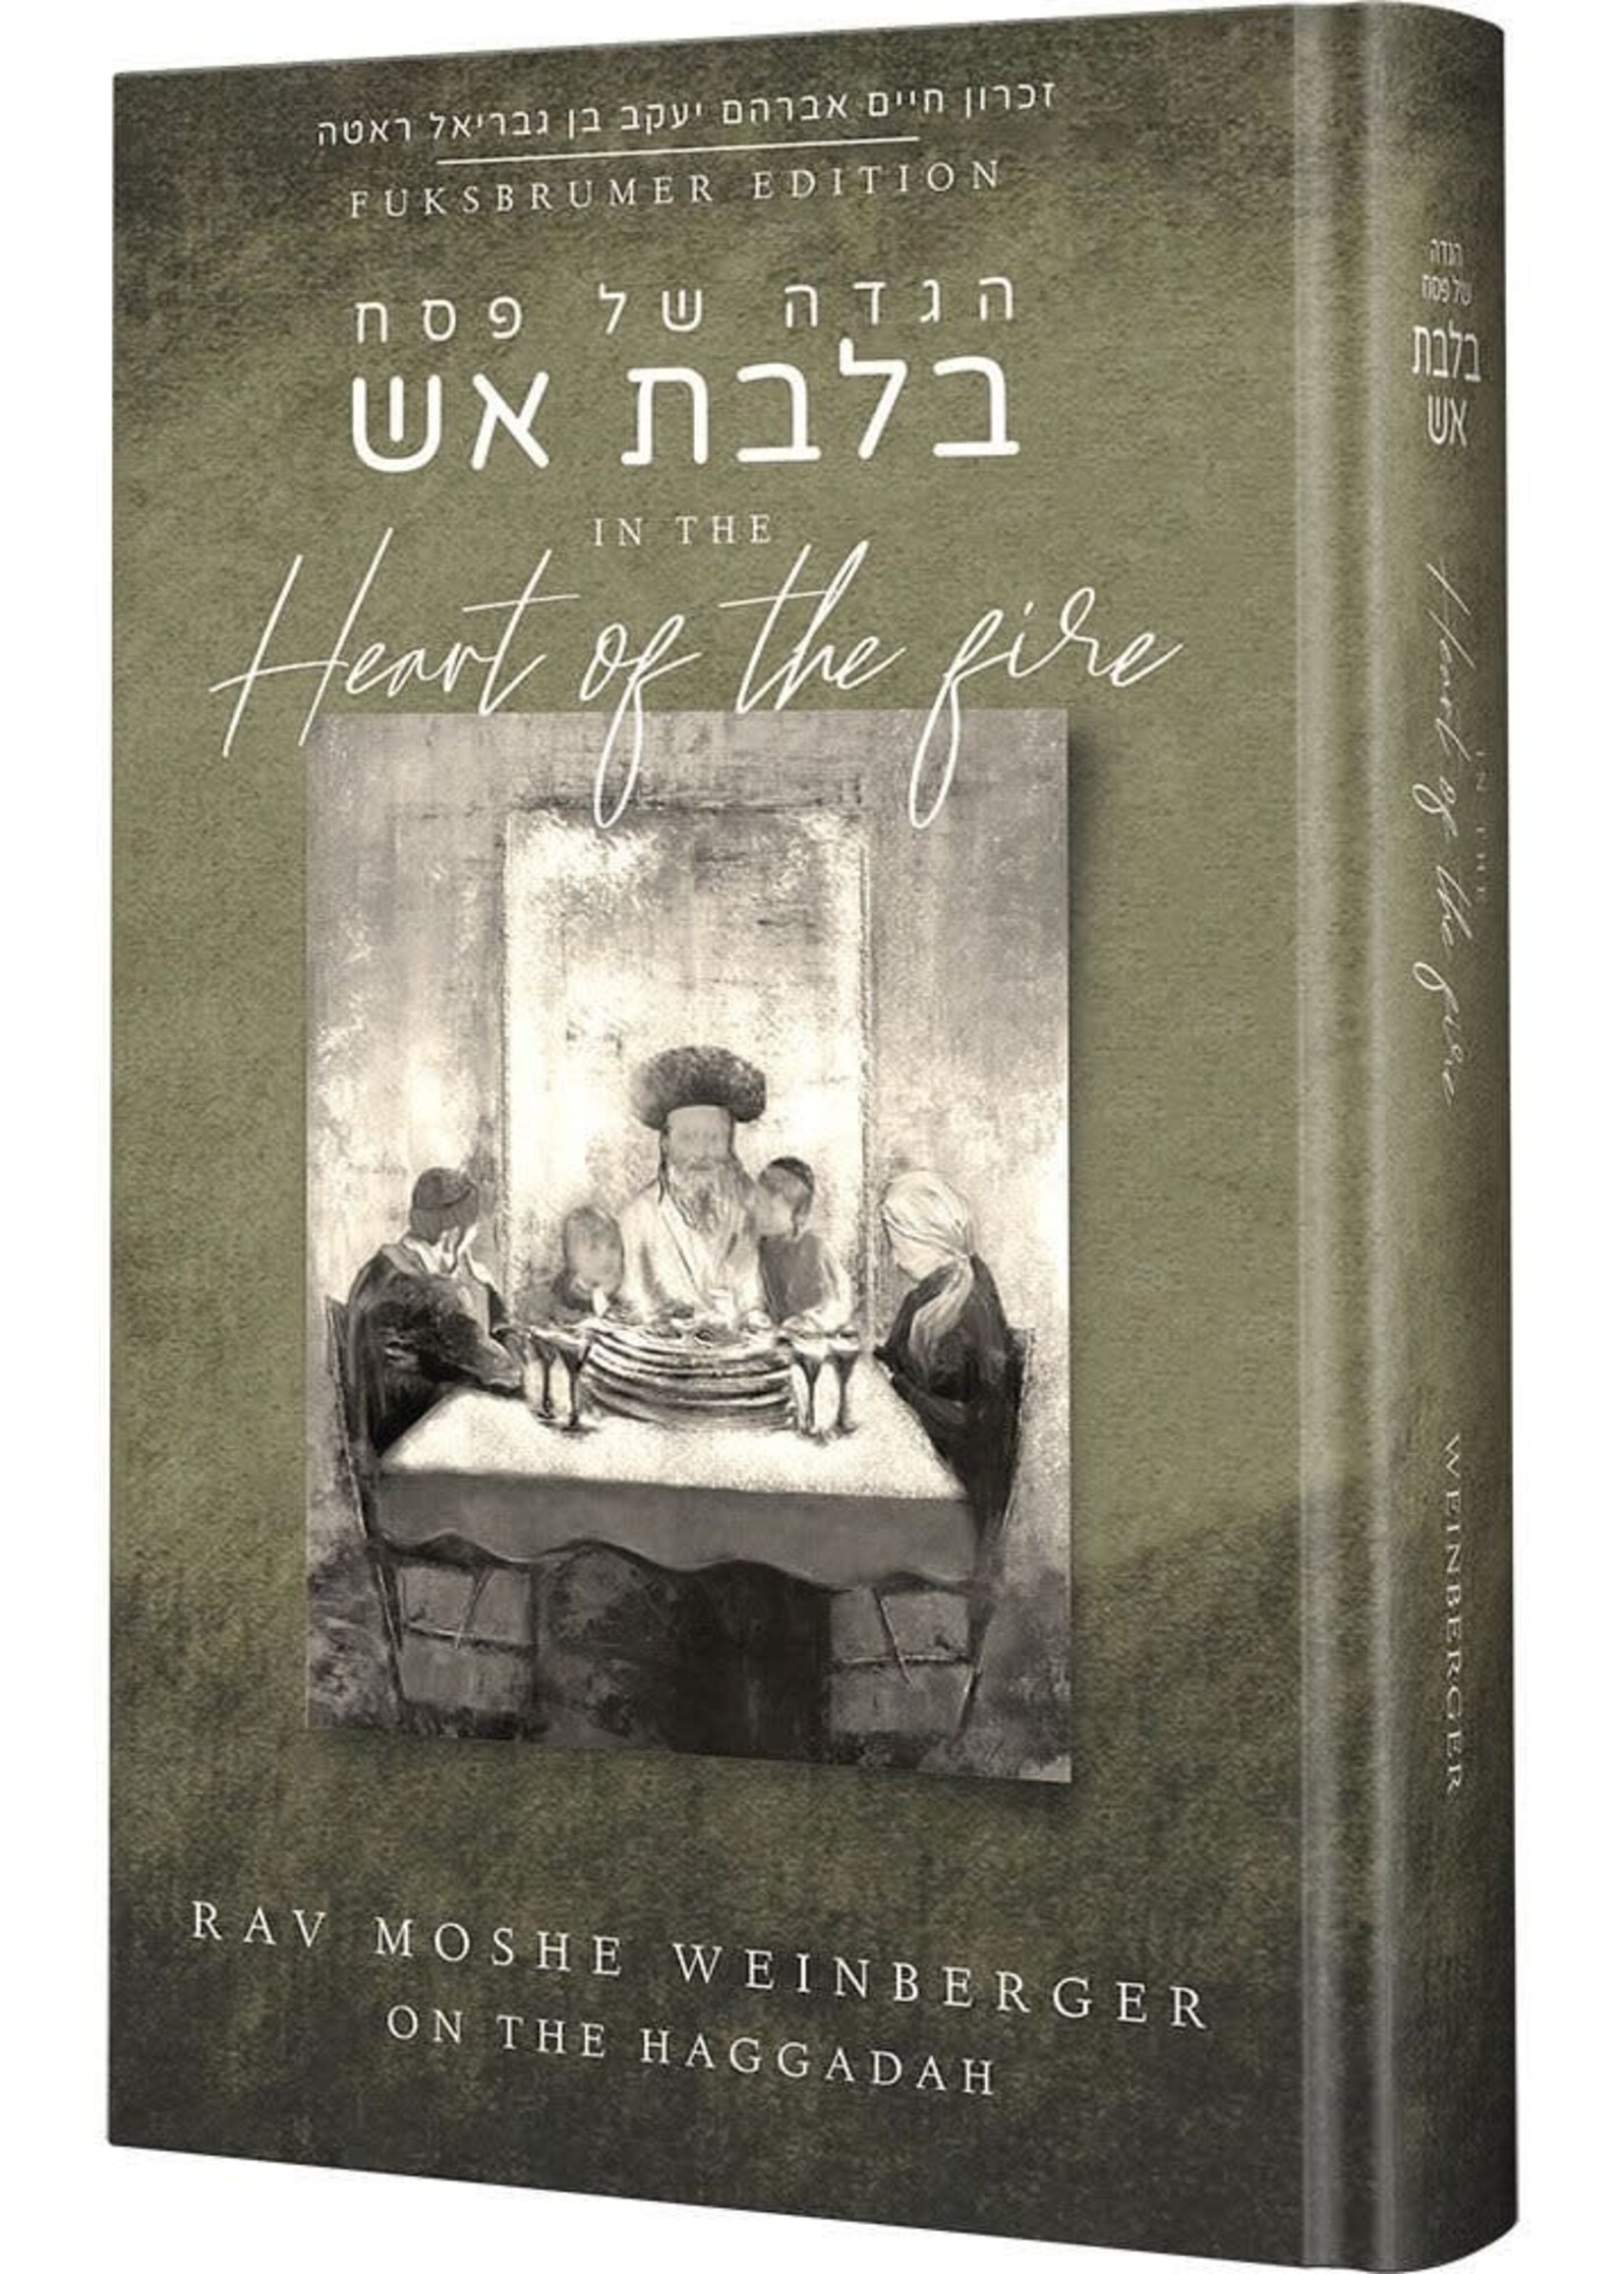 Rabbi Moshe Weinberger In the Heart of the Fire - Rav Moshe Weinberger On The Haggadah